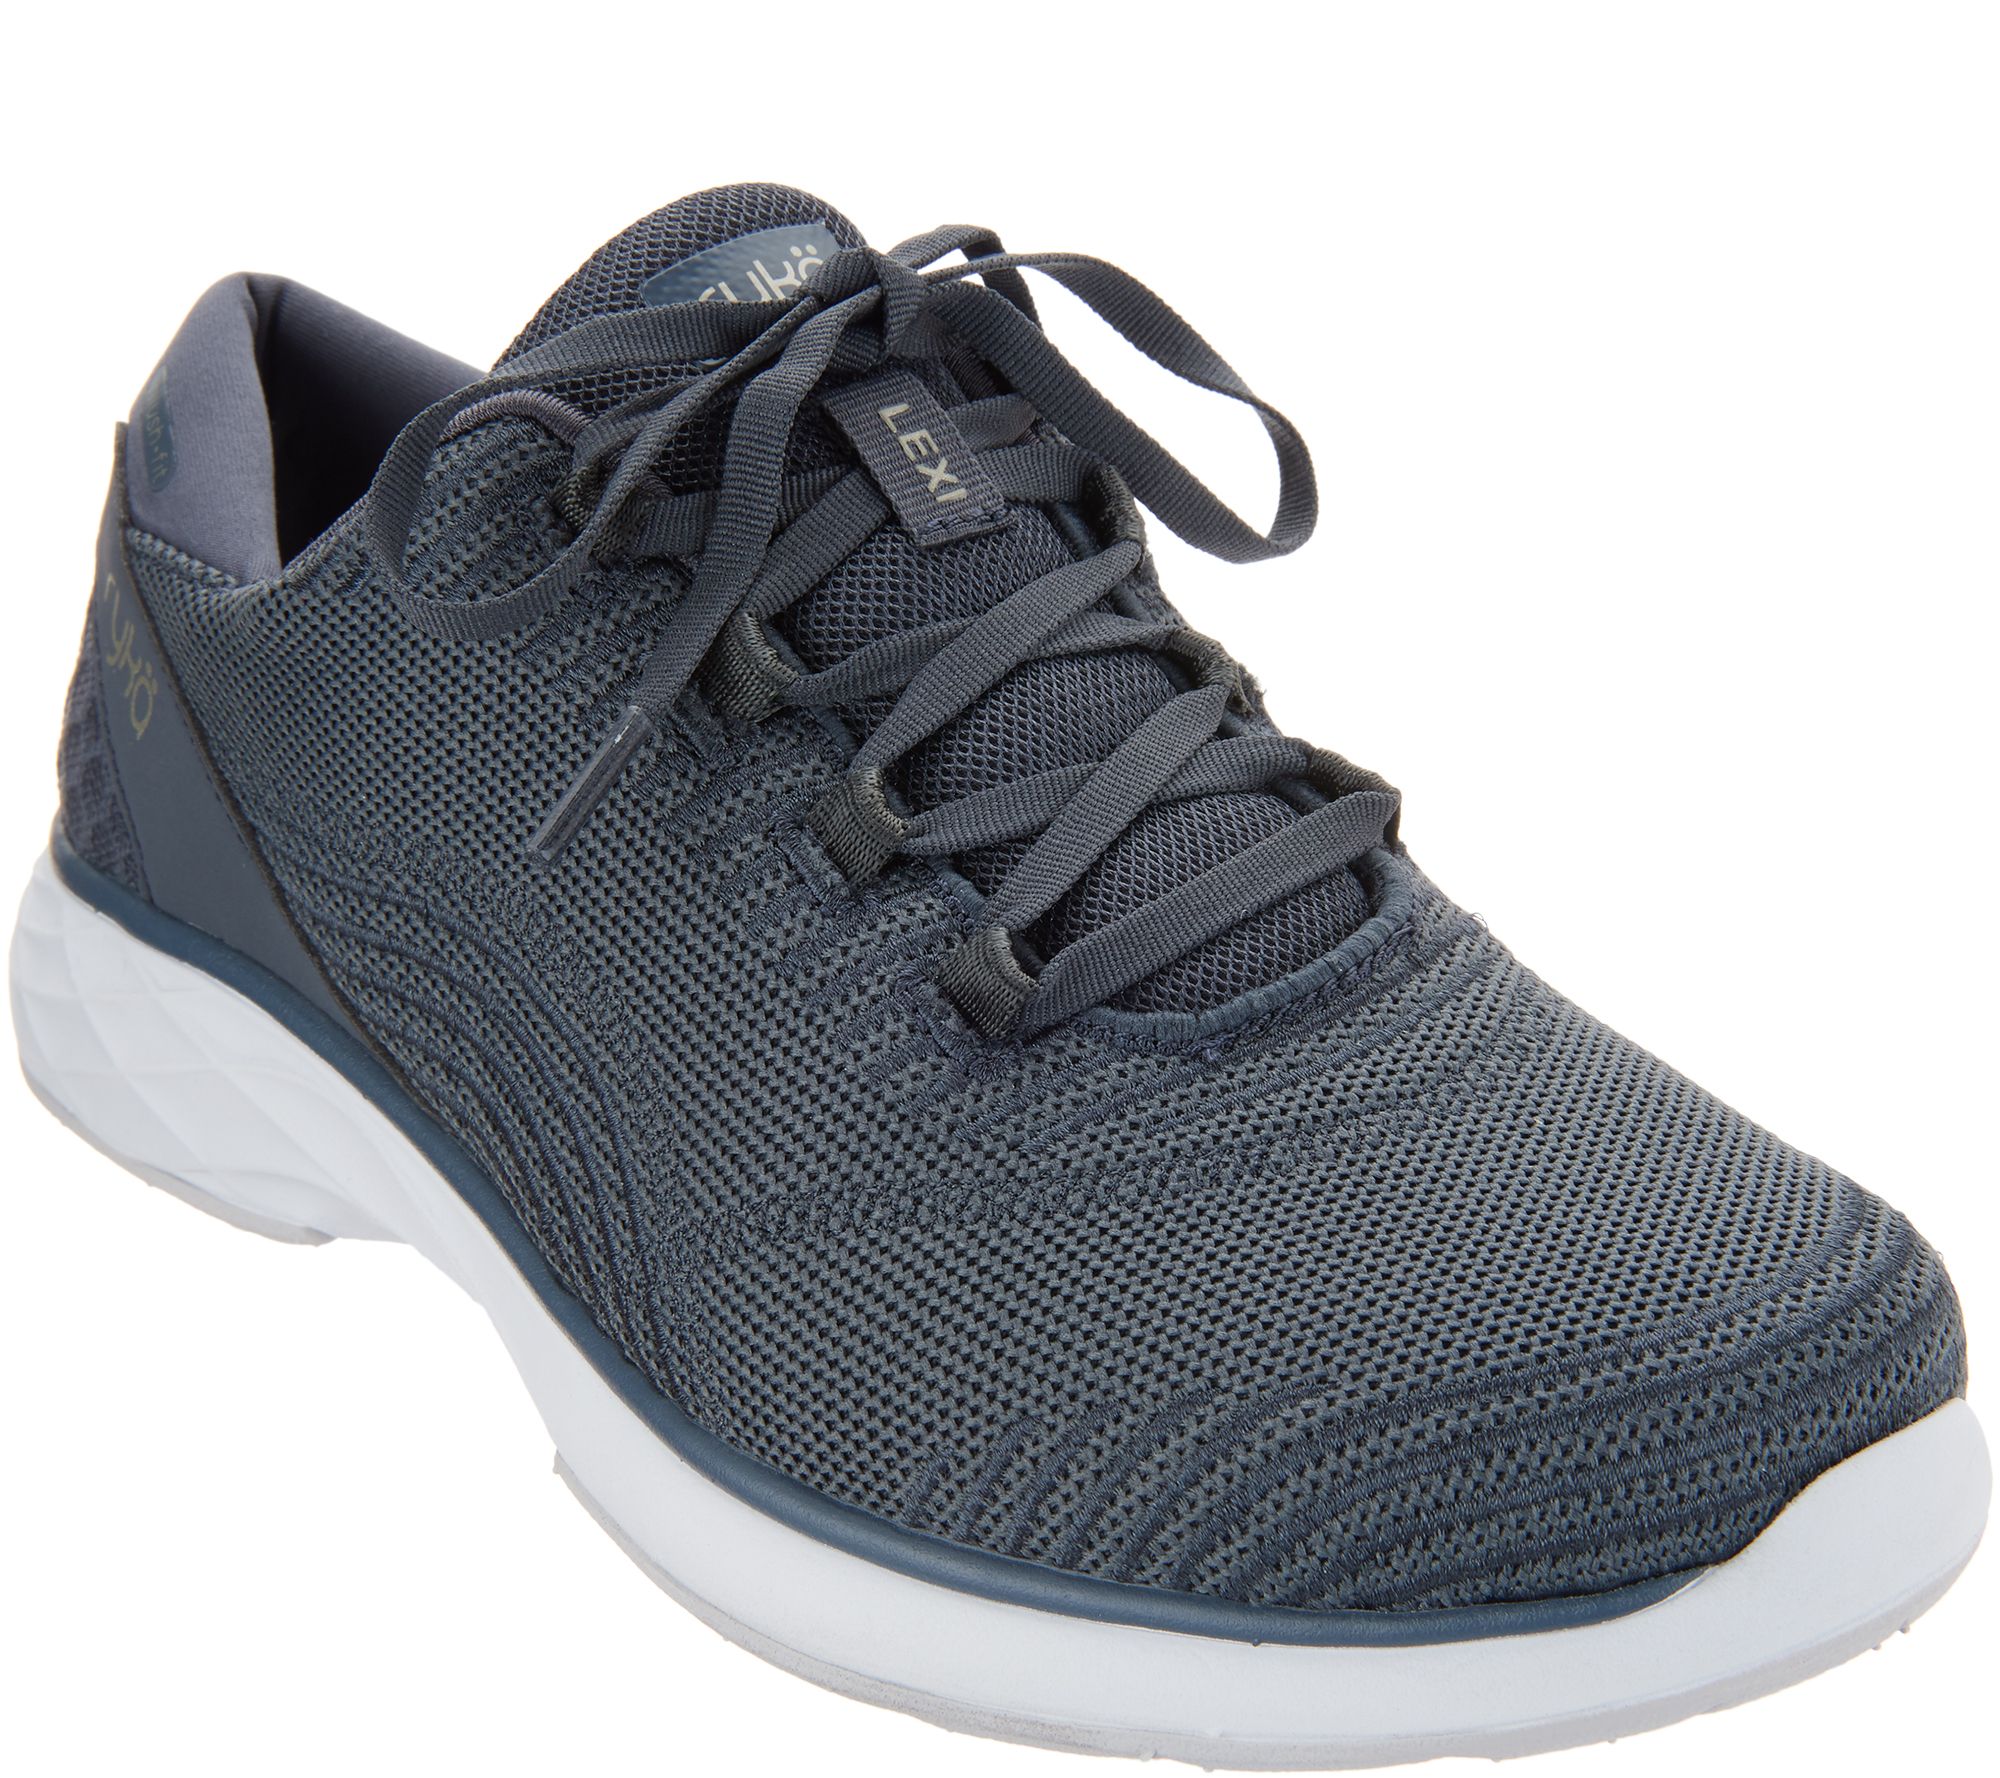 Ryka Knit Lace-Up Sneakers - Lexi - QVC.com